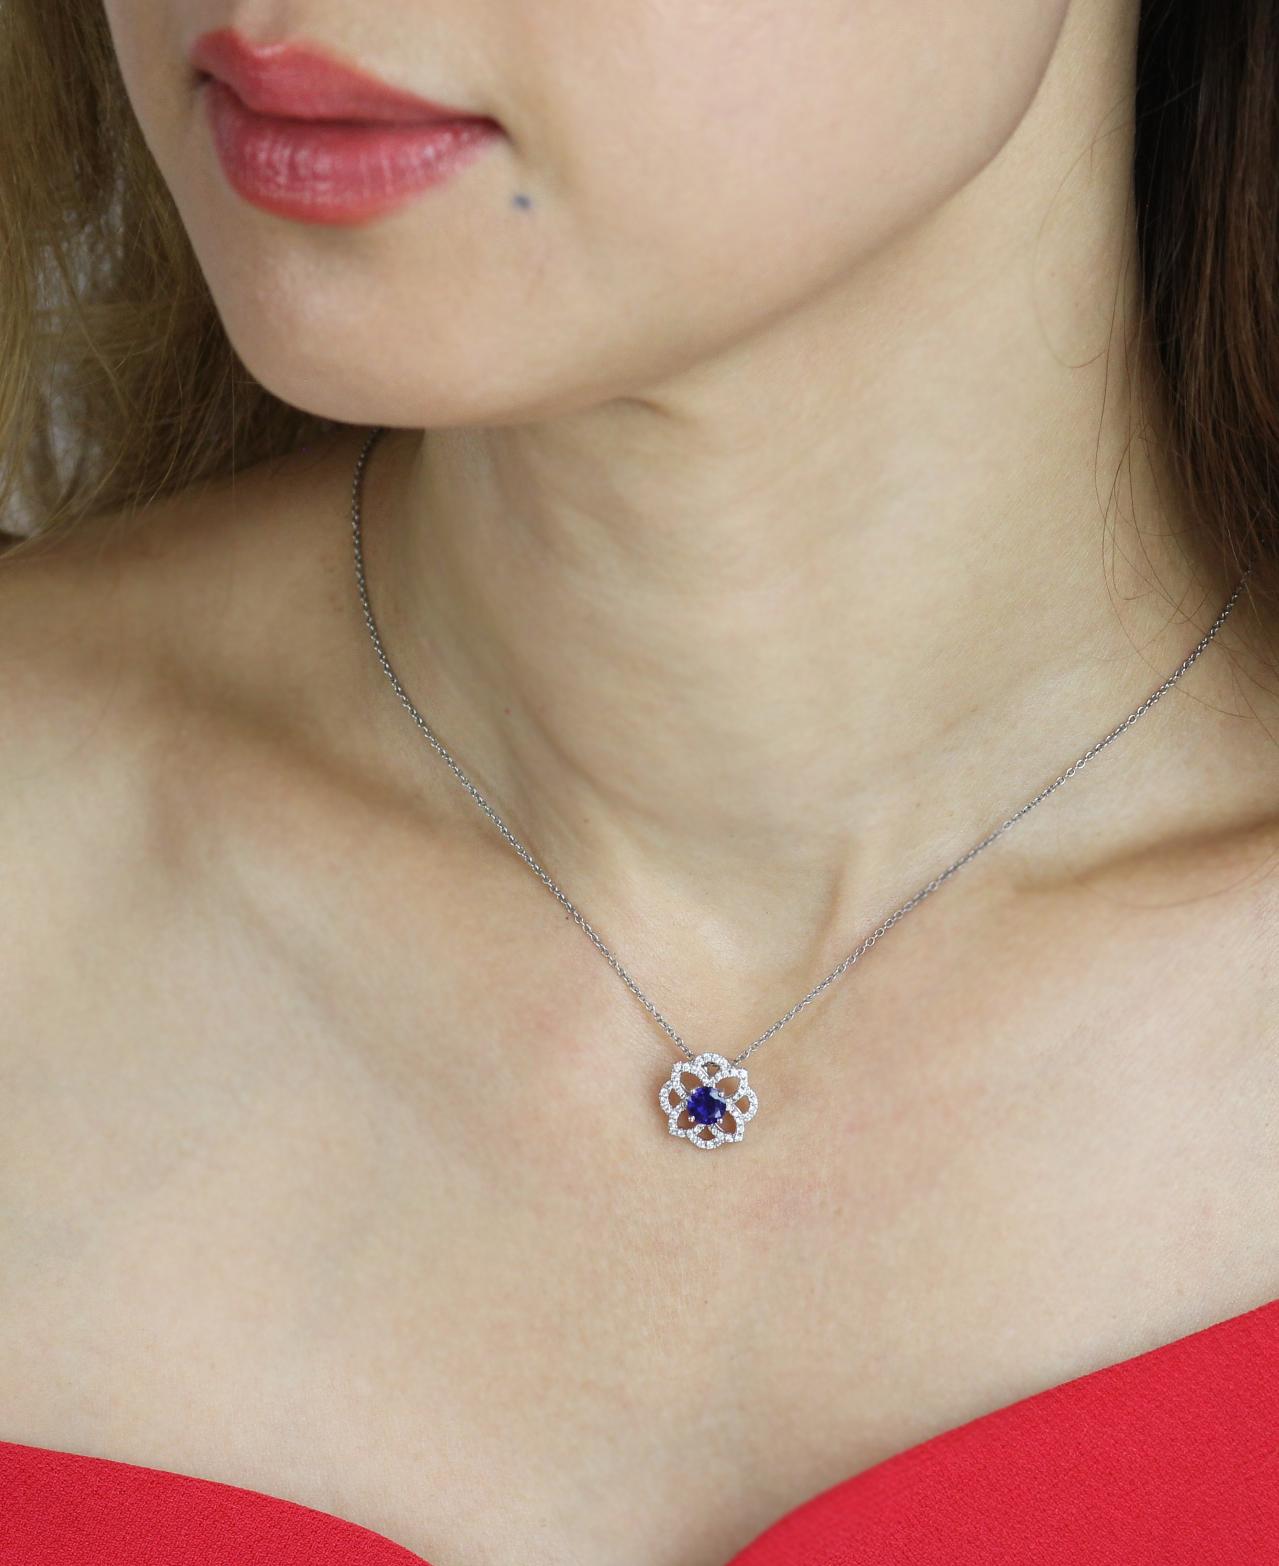 Featuring a double quatrefoil design this stunning pendant features a central round blue sapphire surrounded by an inner pointed diamond set border within an outer rounded diamond set border.  With beautiful detail, this sparkly pendant offers a